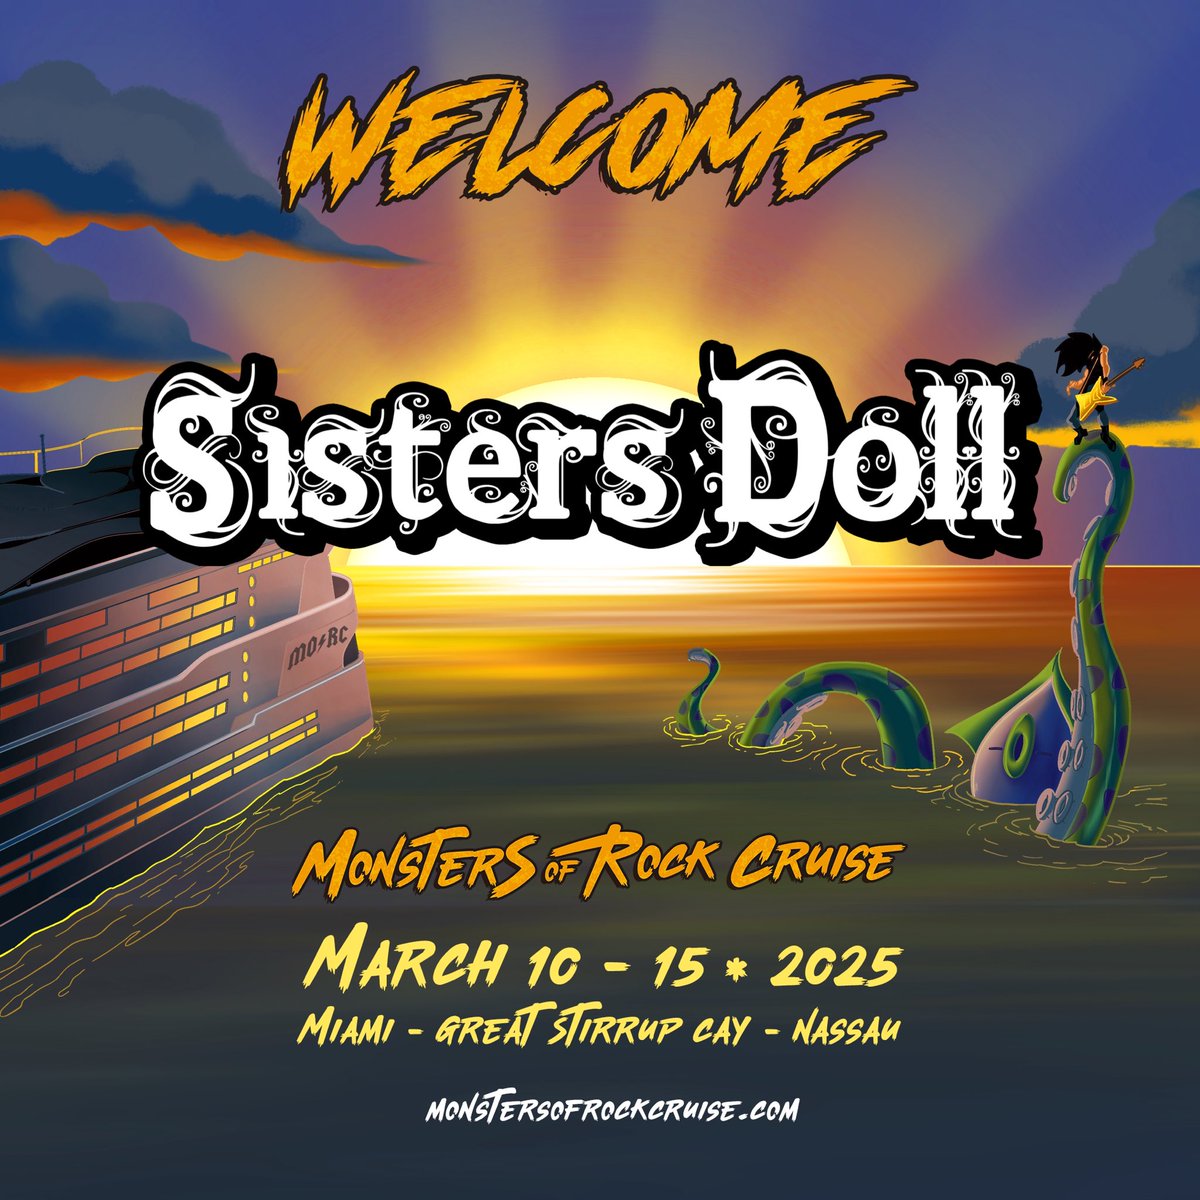 Please welcome Sisters Doll🇦🇺 to the 2025 Monsters Of Rock Cruise! 🛳️🏴‍☠️
Monstersofrockcruise.com
#morc2025 #sistersdoll #miami #monstersofrockcruise